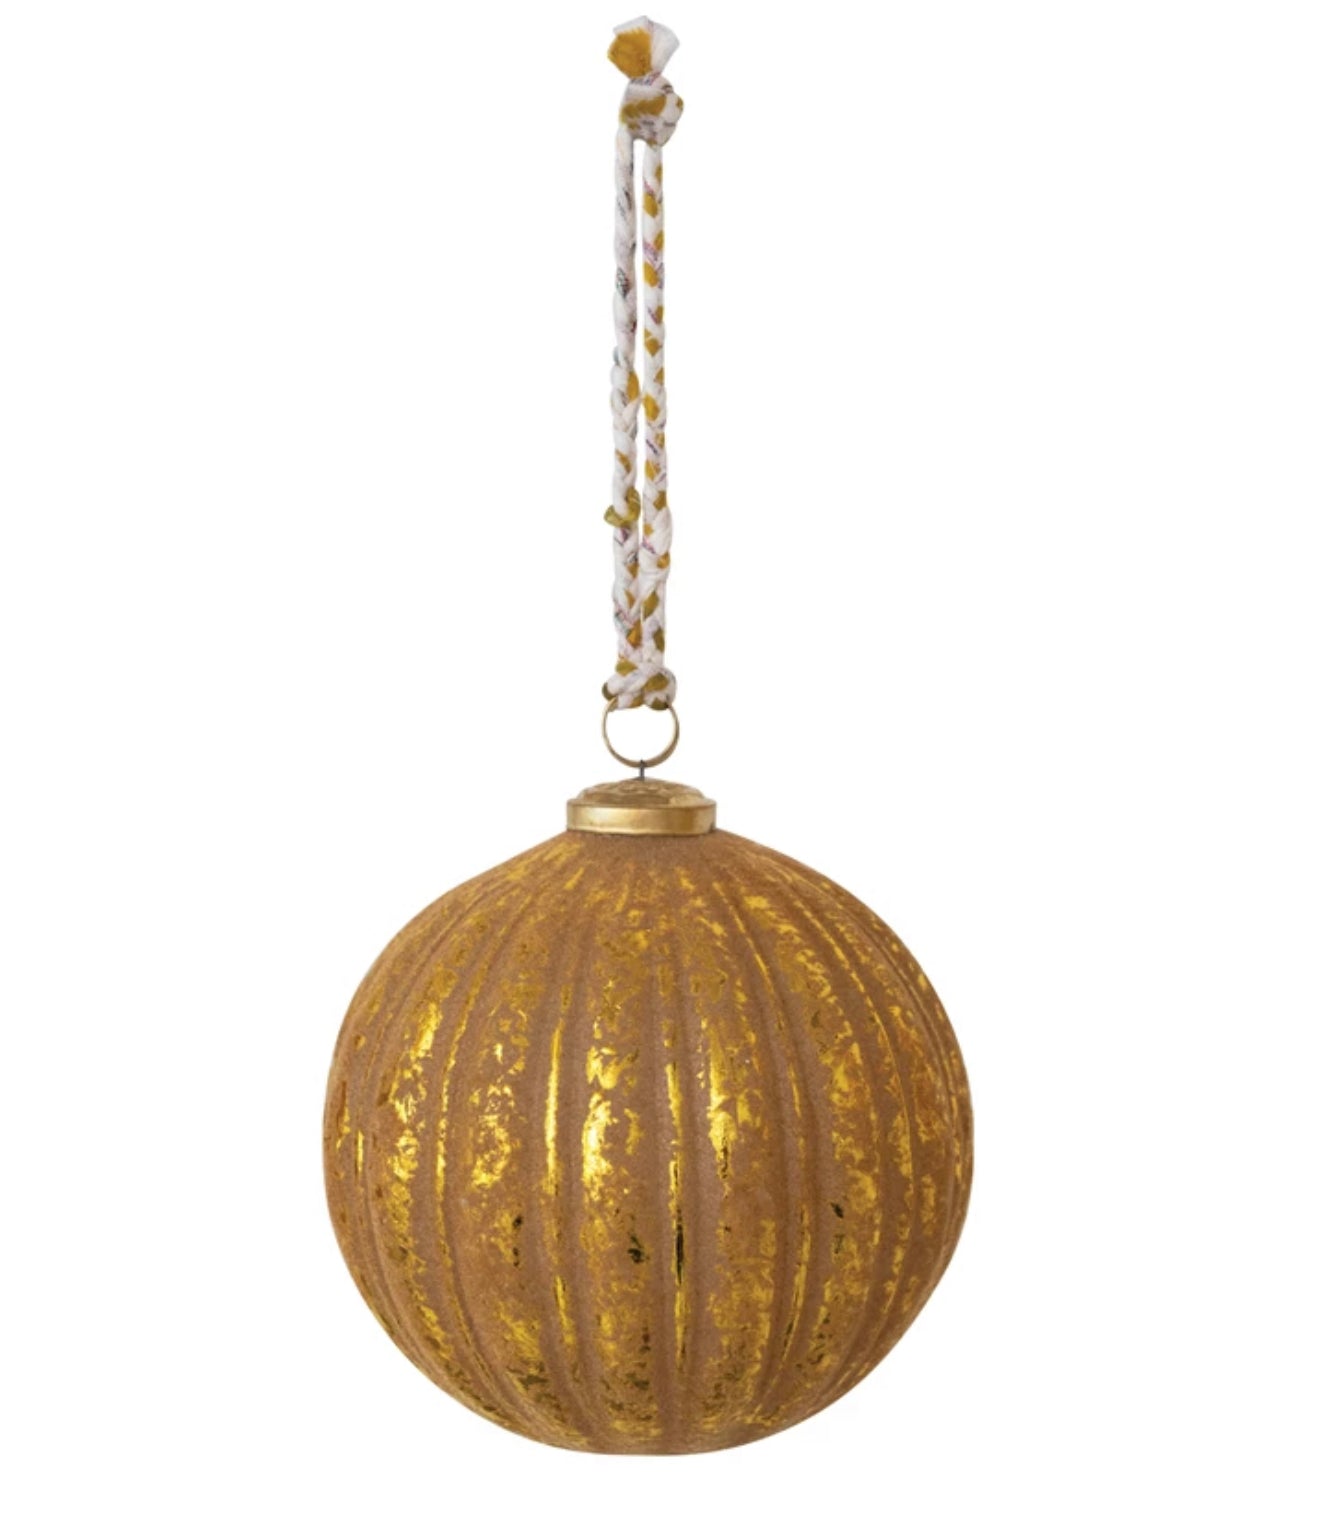 Round Embossed Flocked Glass Ball Ornament with Braided Sari Hanger, Blush and Gold Finish